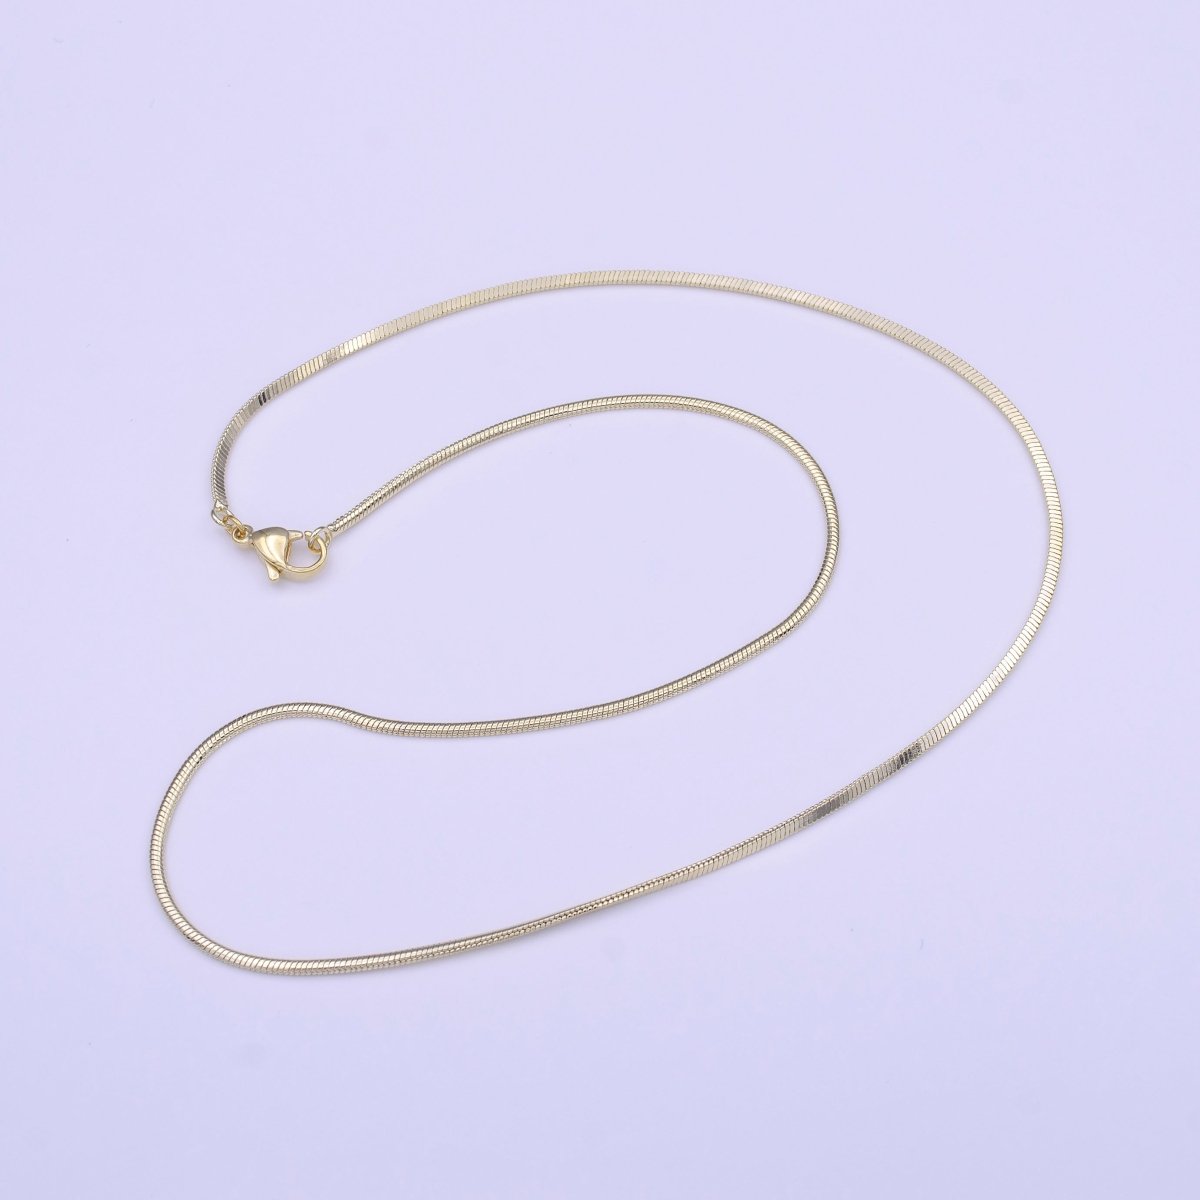 14K Gold Filled Dainty 1.5mm Omega 18 Inch Chain Necklace w. Lobster Clasps Closure | WA-1456 Clearance Pricing - DLUXCA